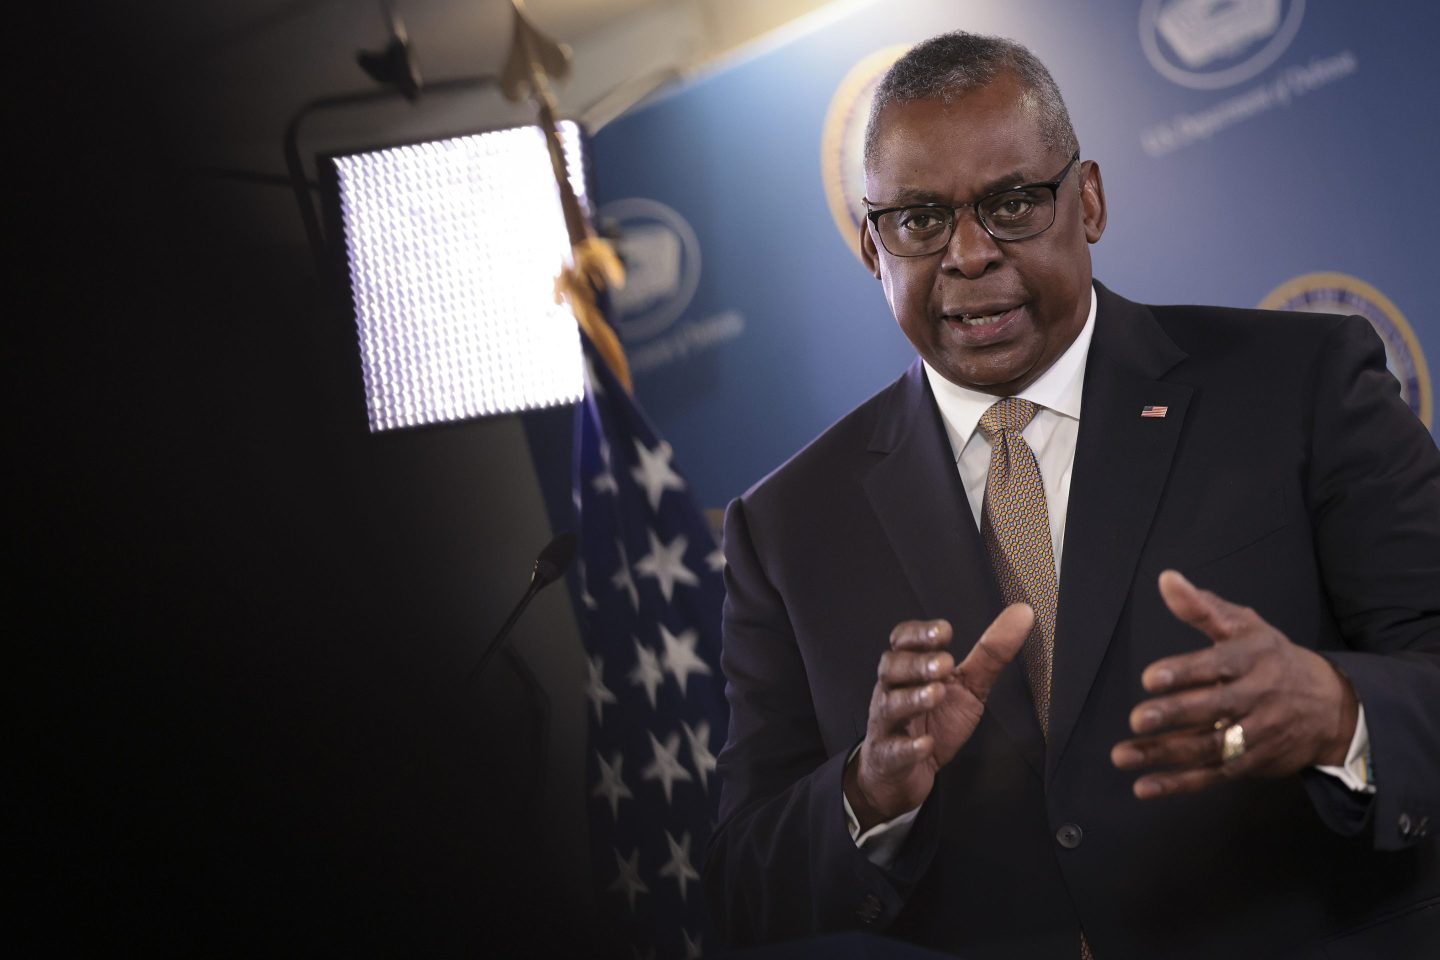 ARLINGTON, VIRGINIA &#8211; MAY 25: U.S. Defense Secretary Lloyd Austin speaks during a news conference at the Pentagon May 25, 2023 in Arlington, Virginia. Austin and Army Gen. Mark Milley, chairman of the Joint Chiefs of Staff, briefed members of the press following an online session of the Ukraine Defense Contact Group. (Photo by Win McNamee/Getty Images)